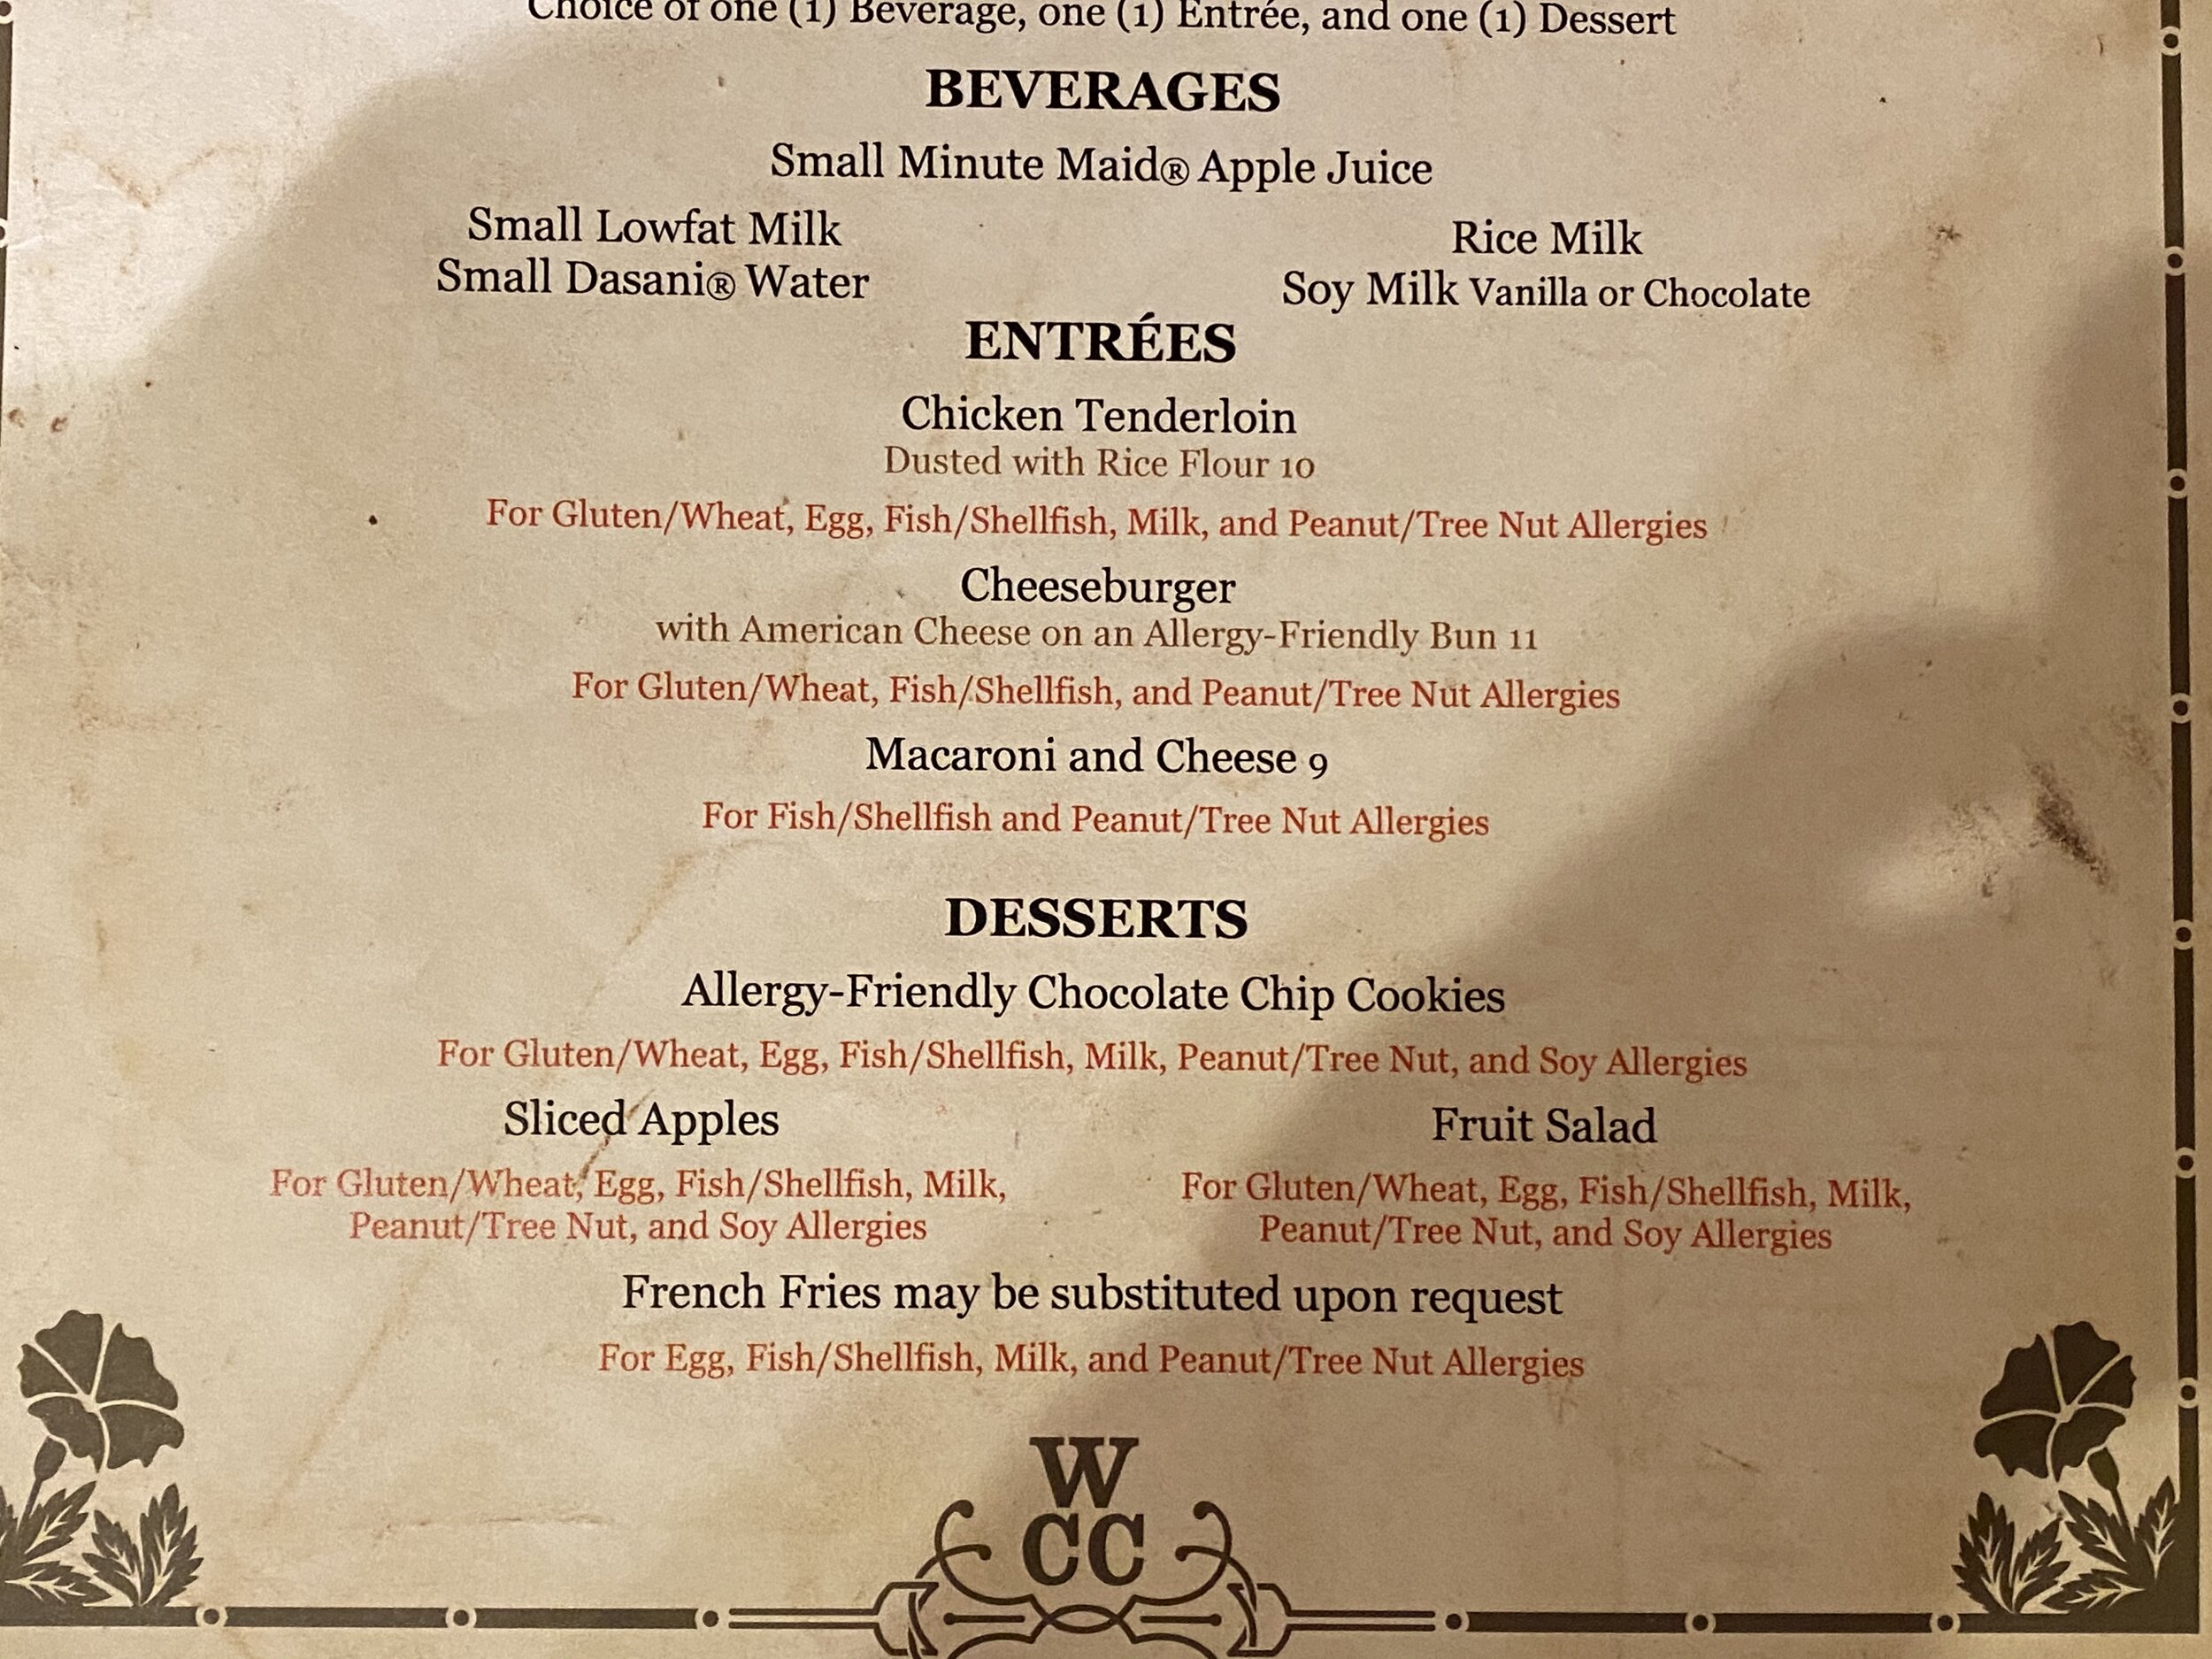 Whispering Canyon Cafe Allergy-Friendly Dinner Menu